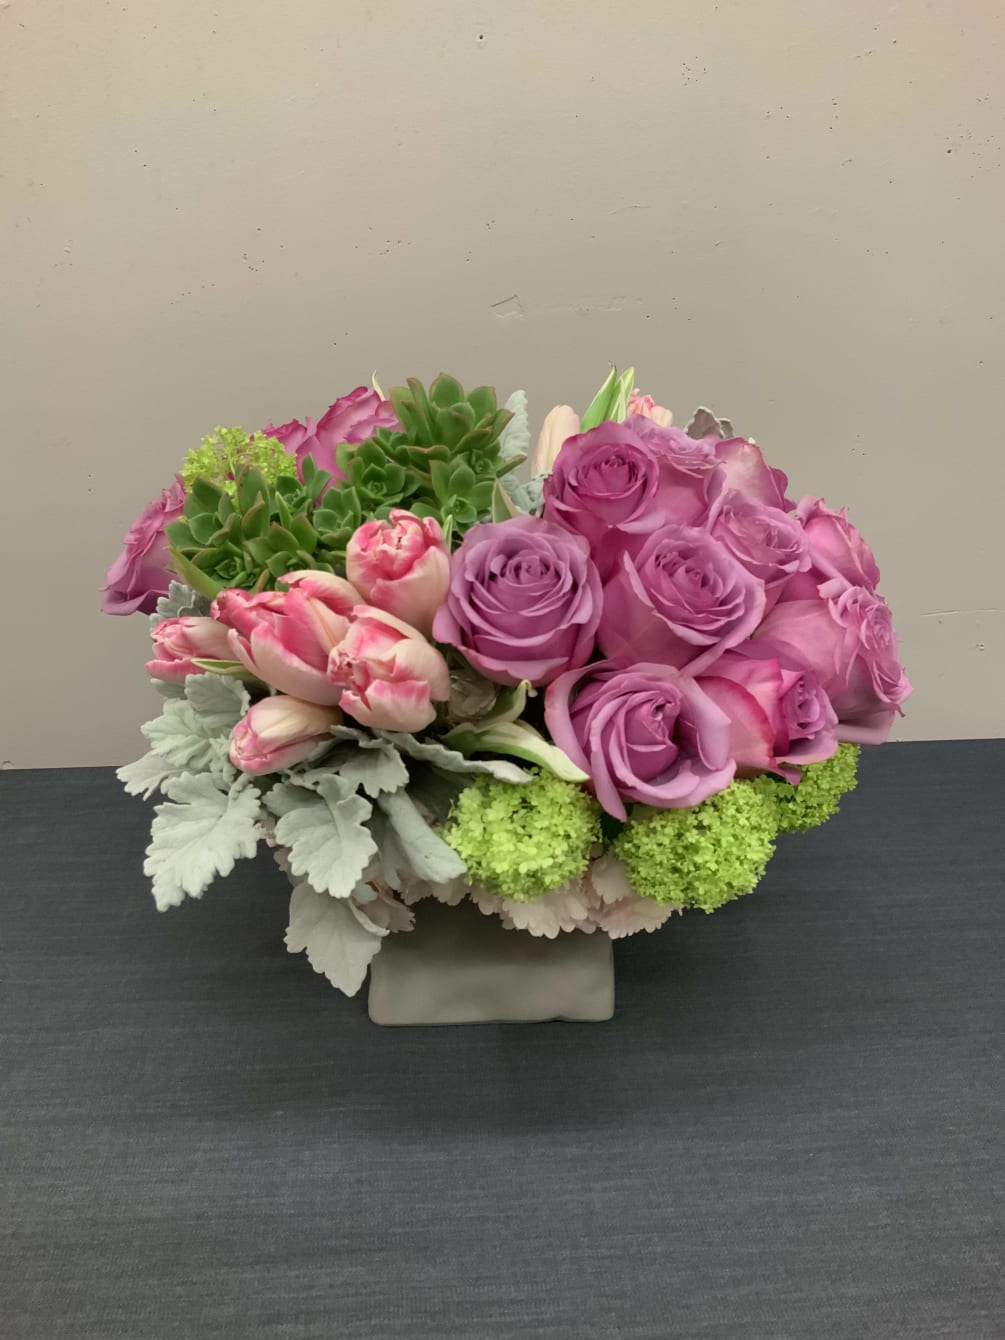 An arrangement with roses, tulips, succulents, and beautiful greenery. For a special